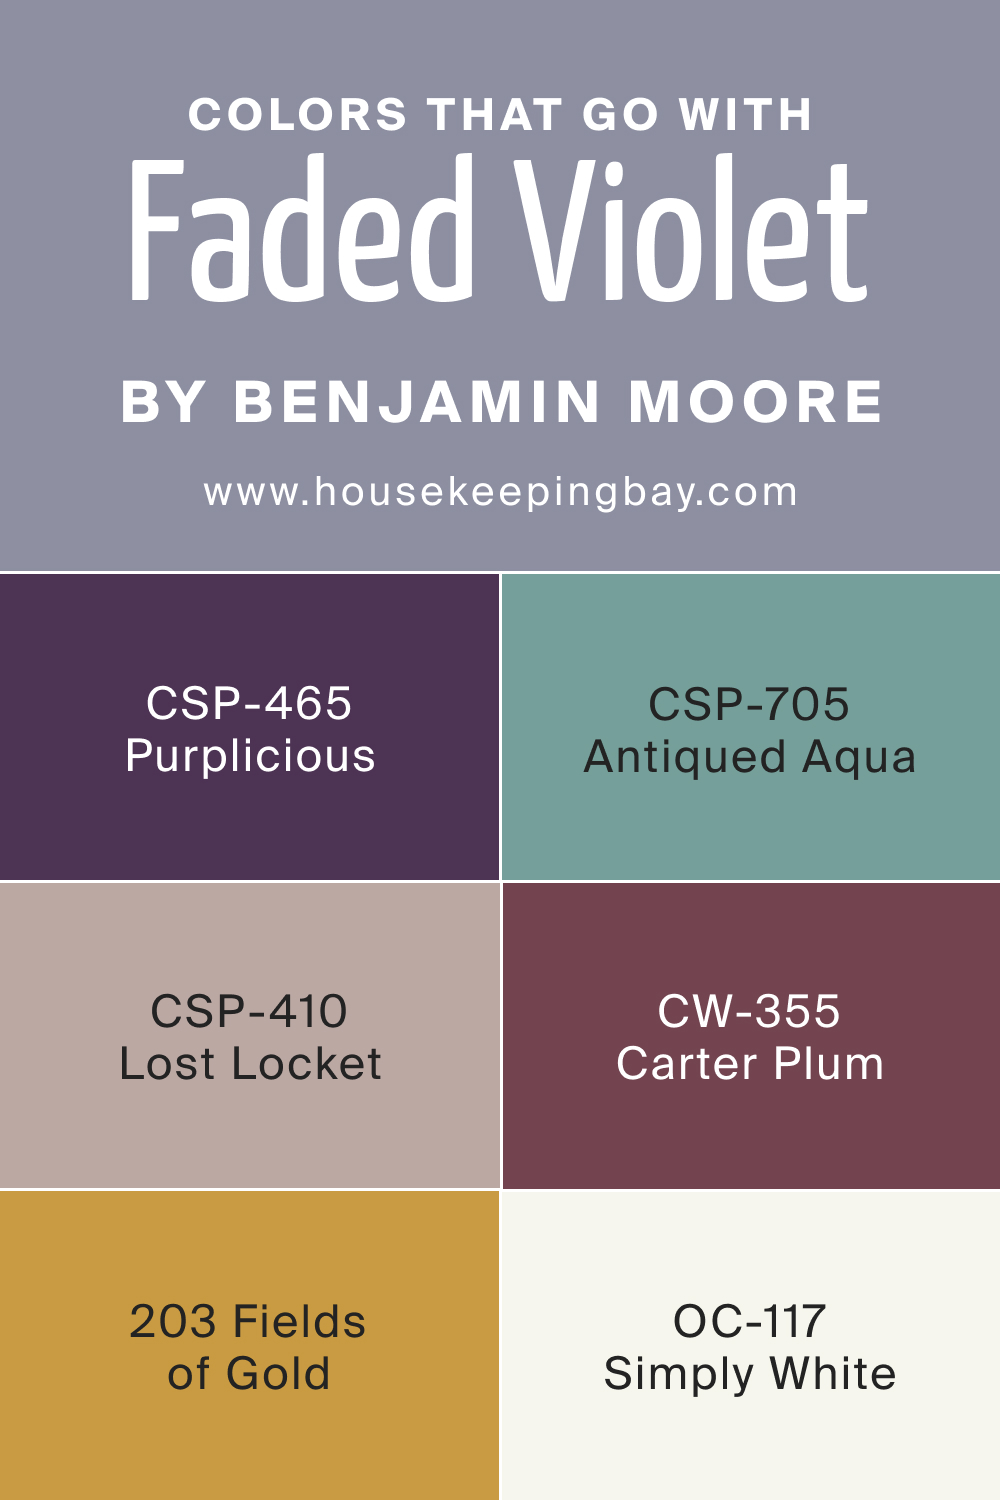 Colors That Go With Faded Violet CSP-455